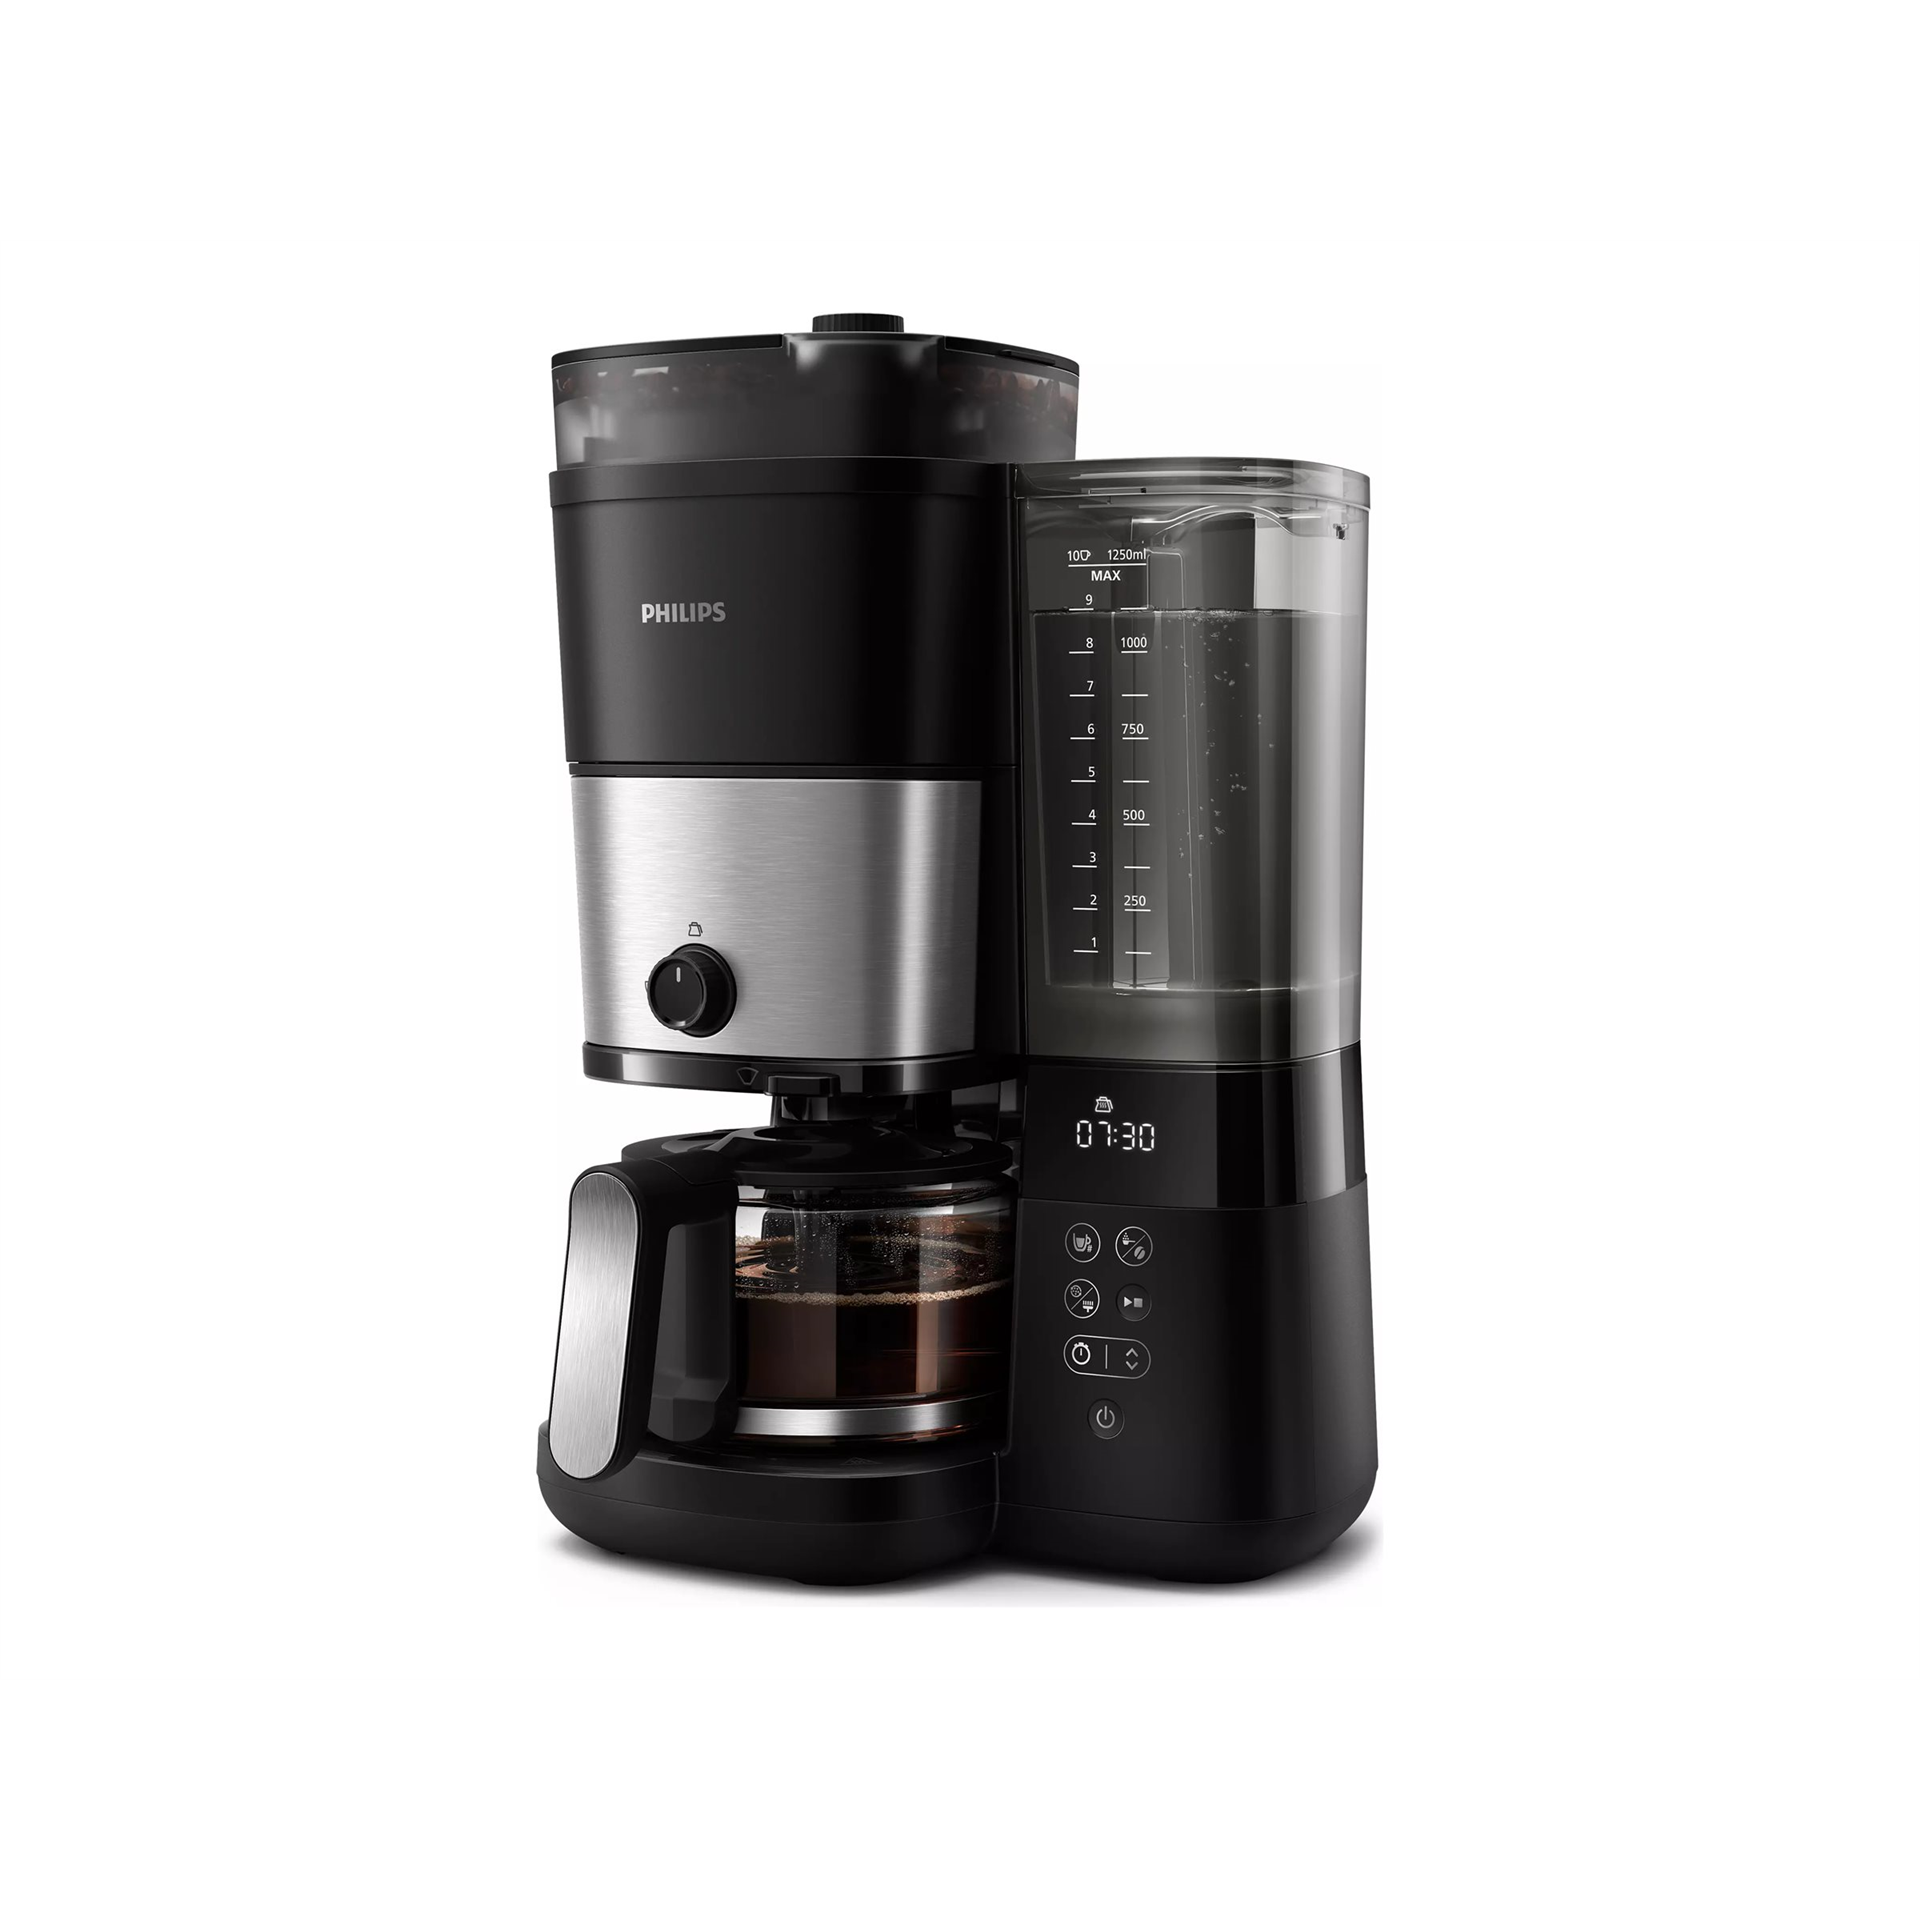 Philips HD7900/50 All-in-1 Brew Coffee Machine, Black/Stainless Steel Philips